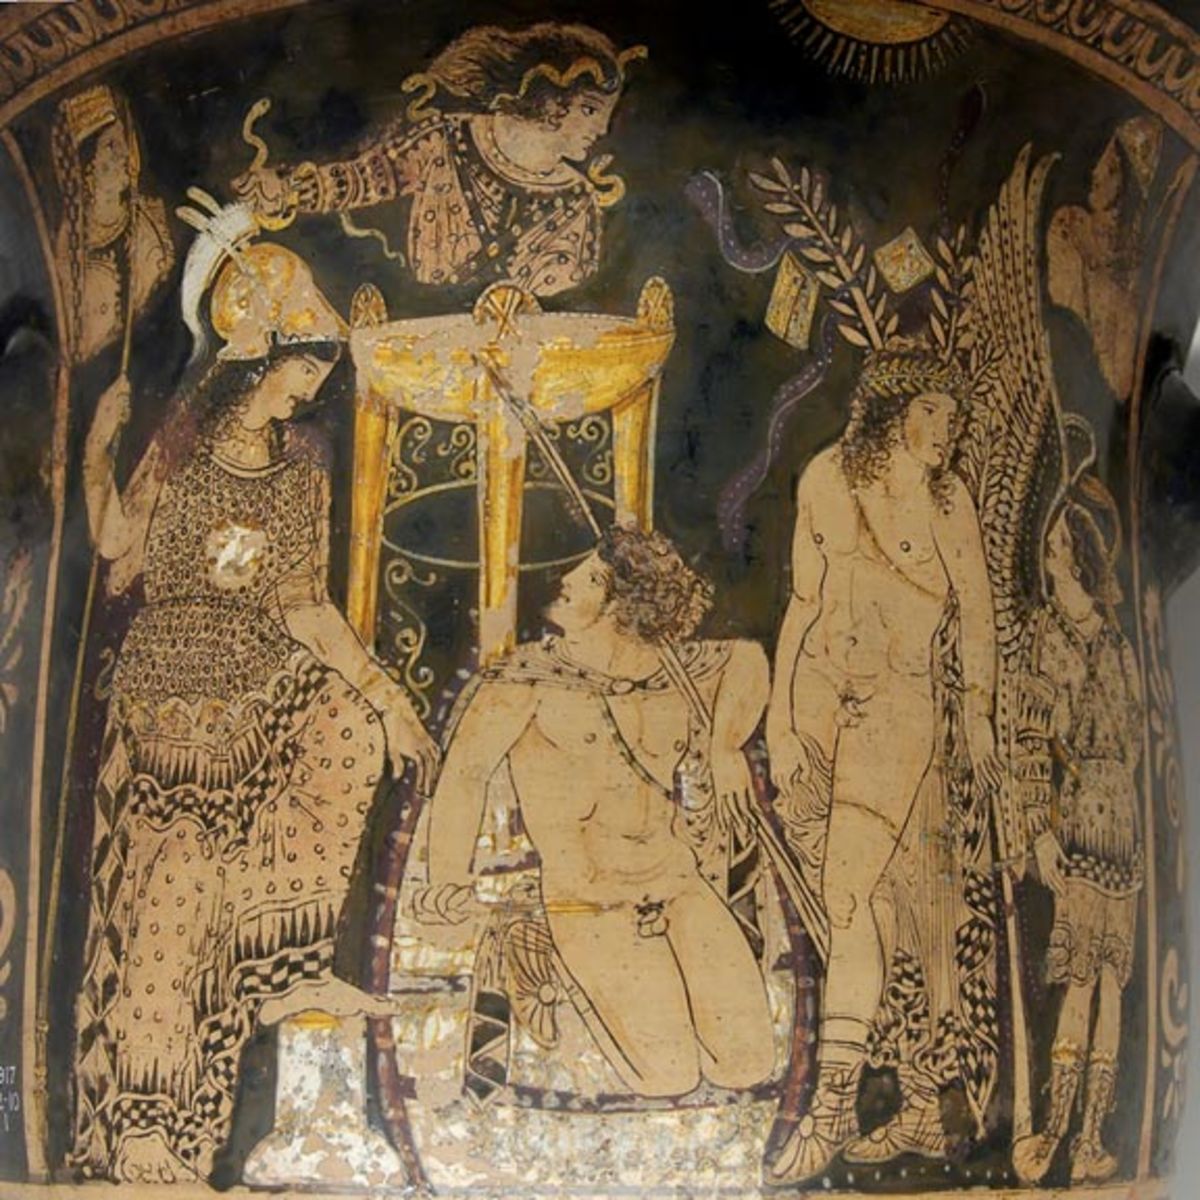 The Fury near the top of the vase is adorned with her characteristic snakes.